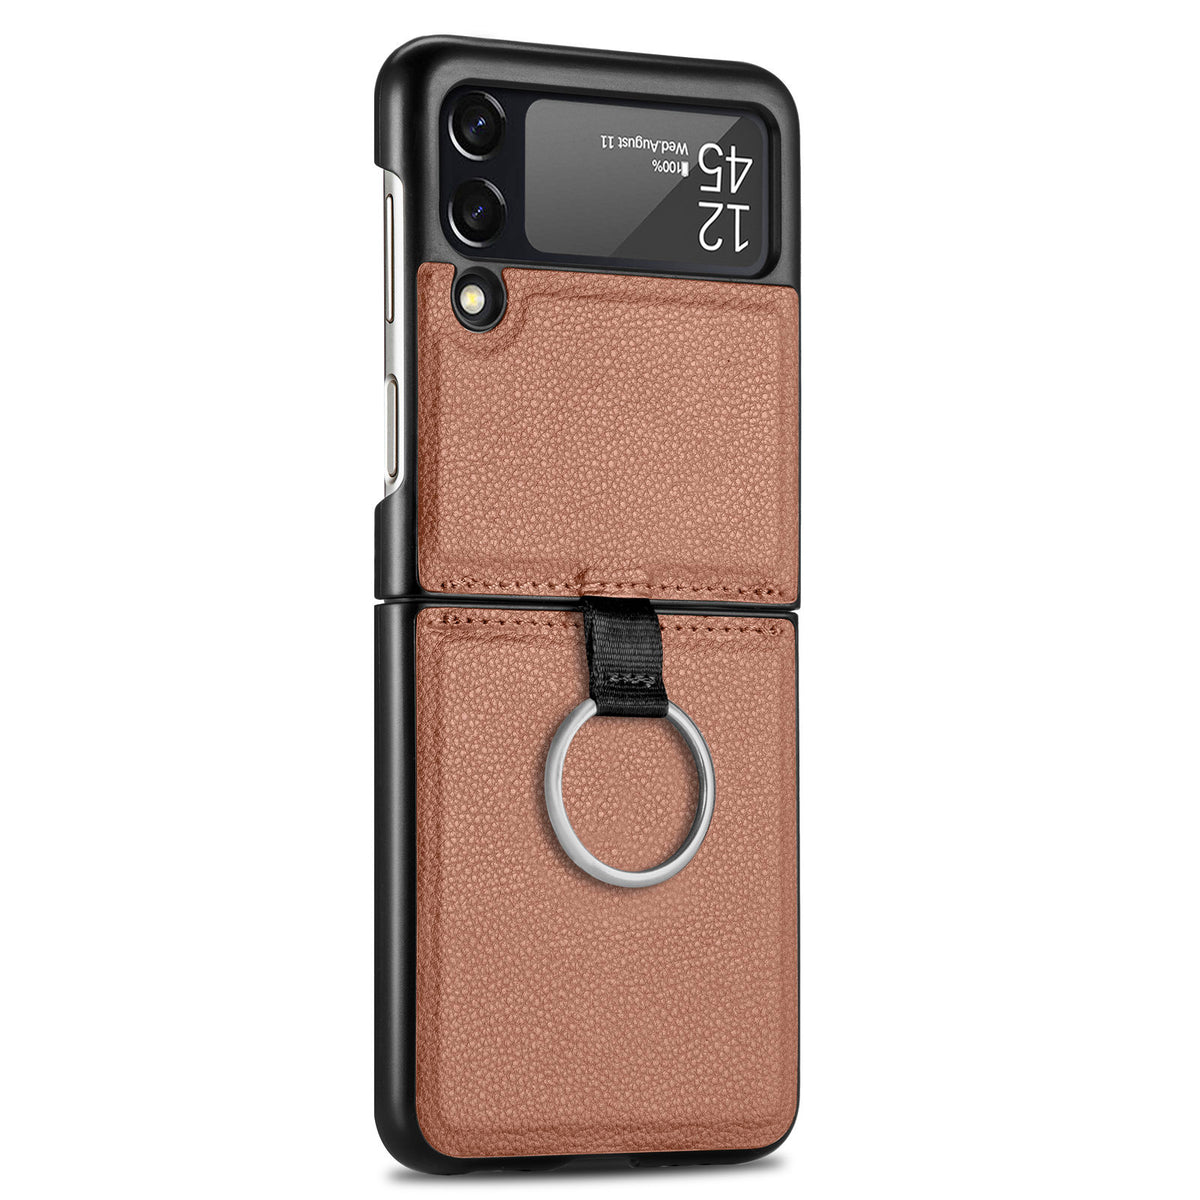 Leather Ring Type Mobile Phone Case Protective Shell